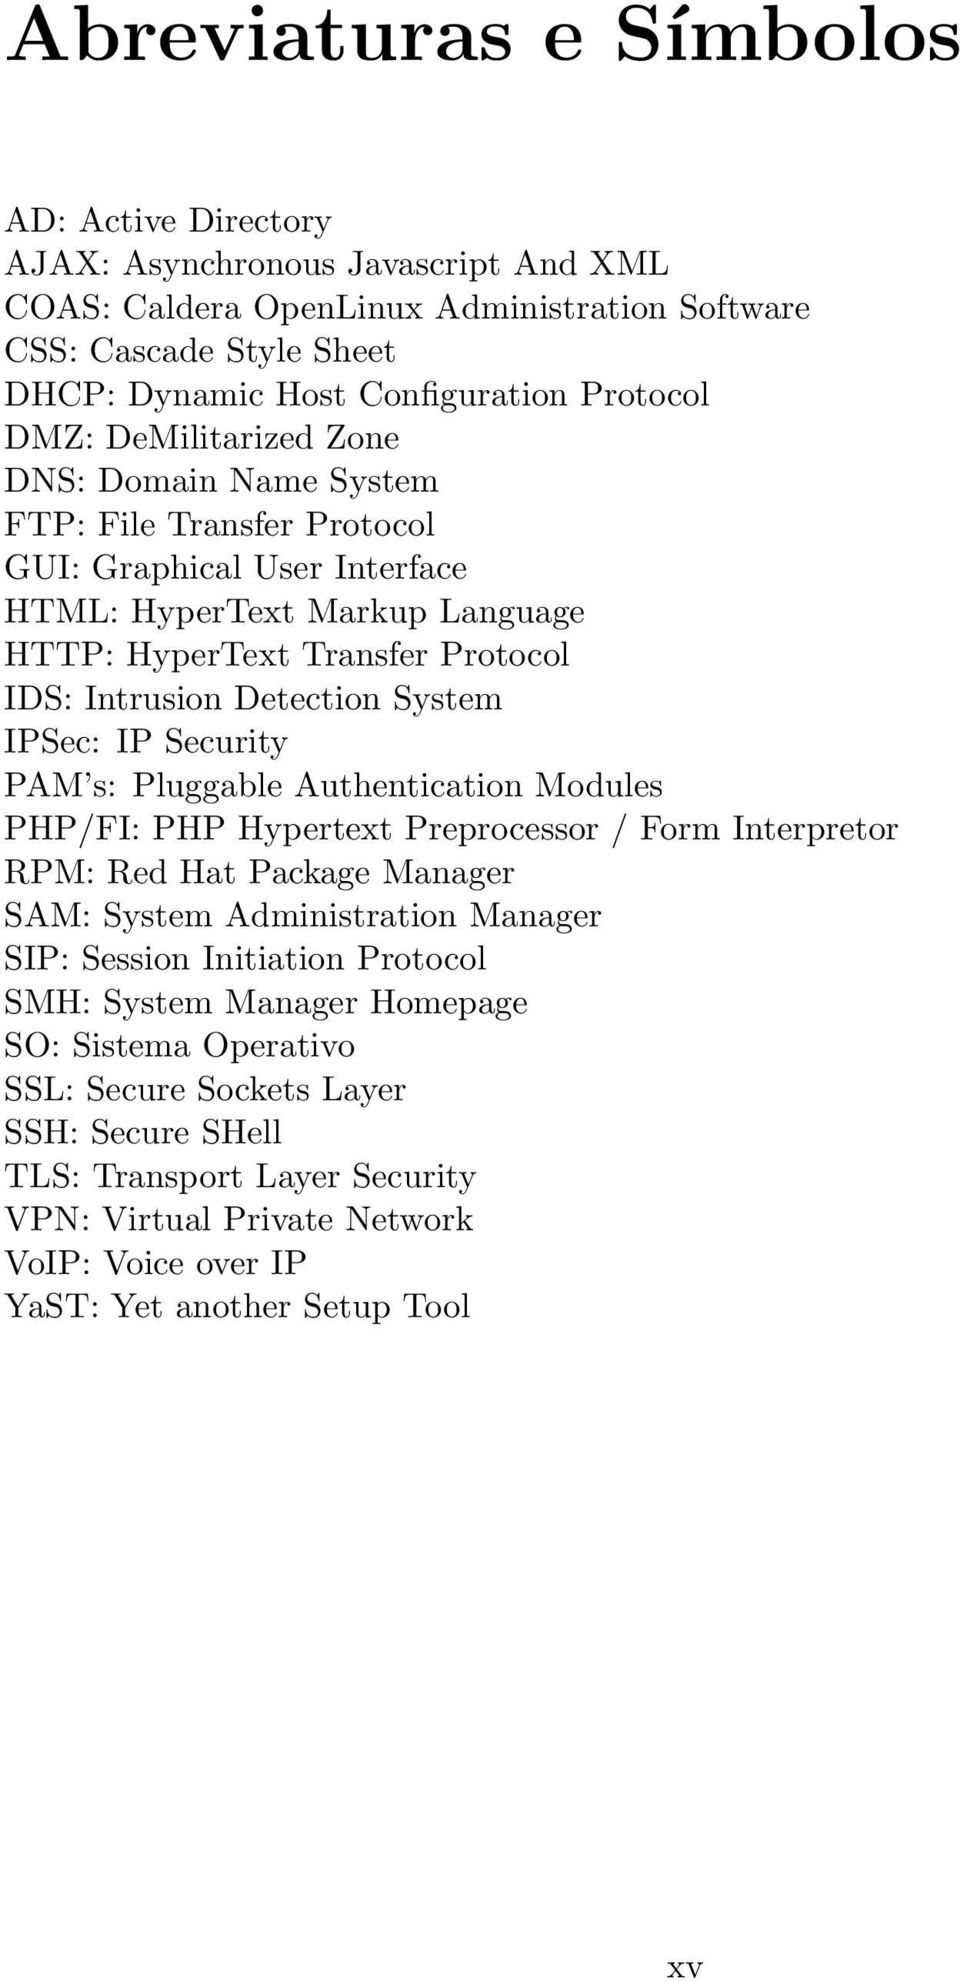 System IPSec: IP Security PAM s: Pluggable Authentication Modules PHP/FI: PHP Hypertext Preprocessor / Form Interpretor RPM: Red Hat Package Manager SAM: System Administration Manager SIP: Session